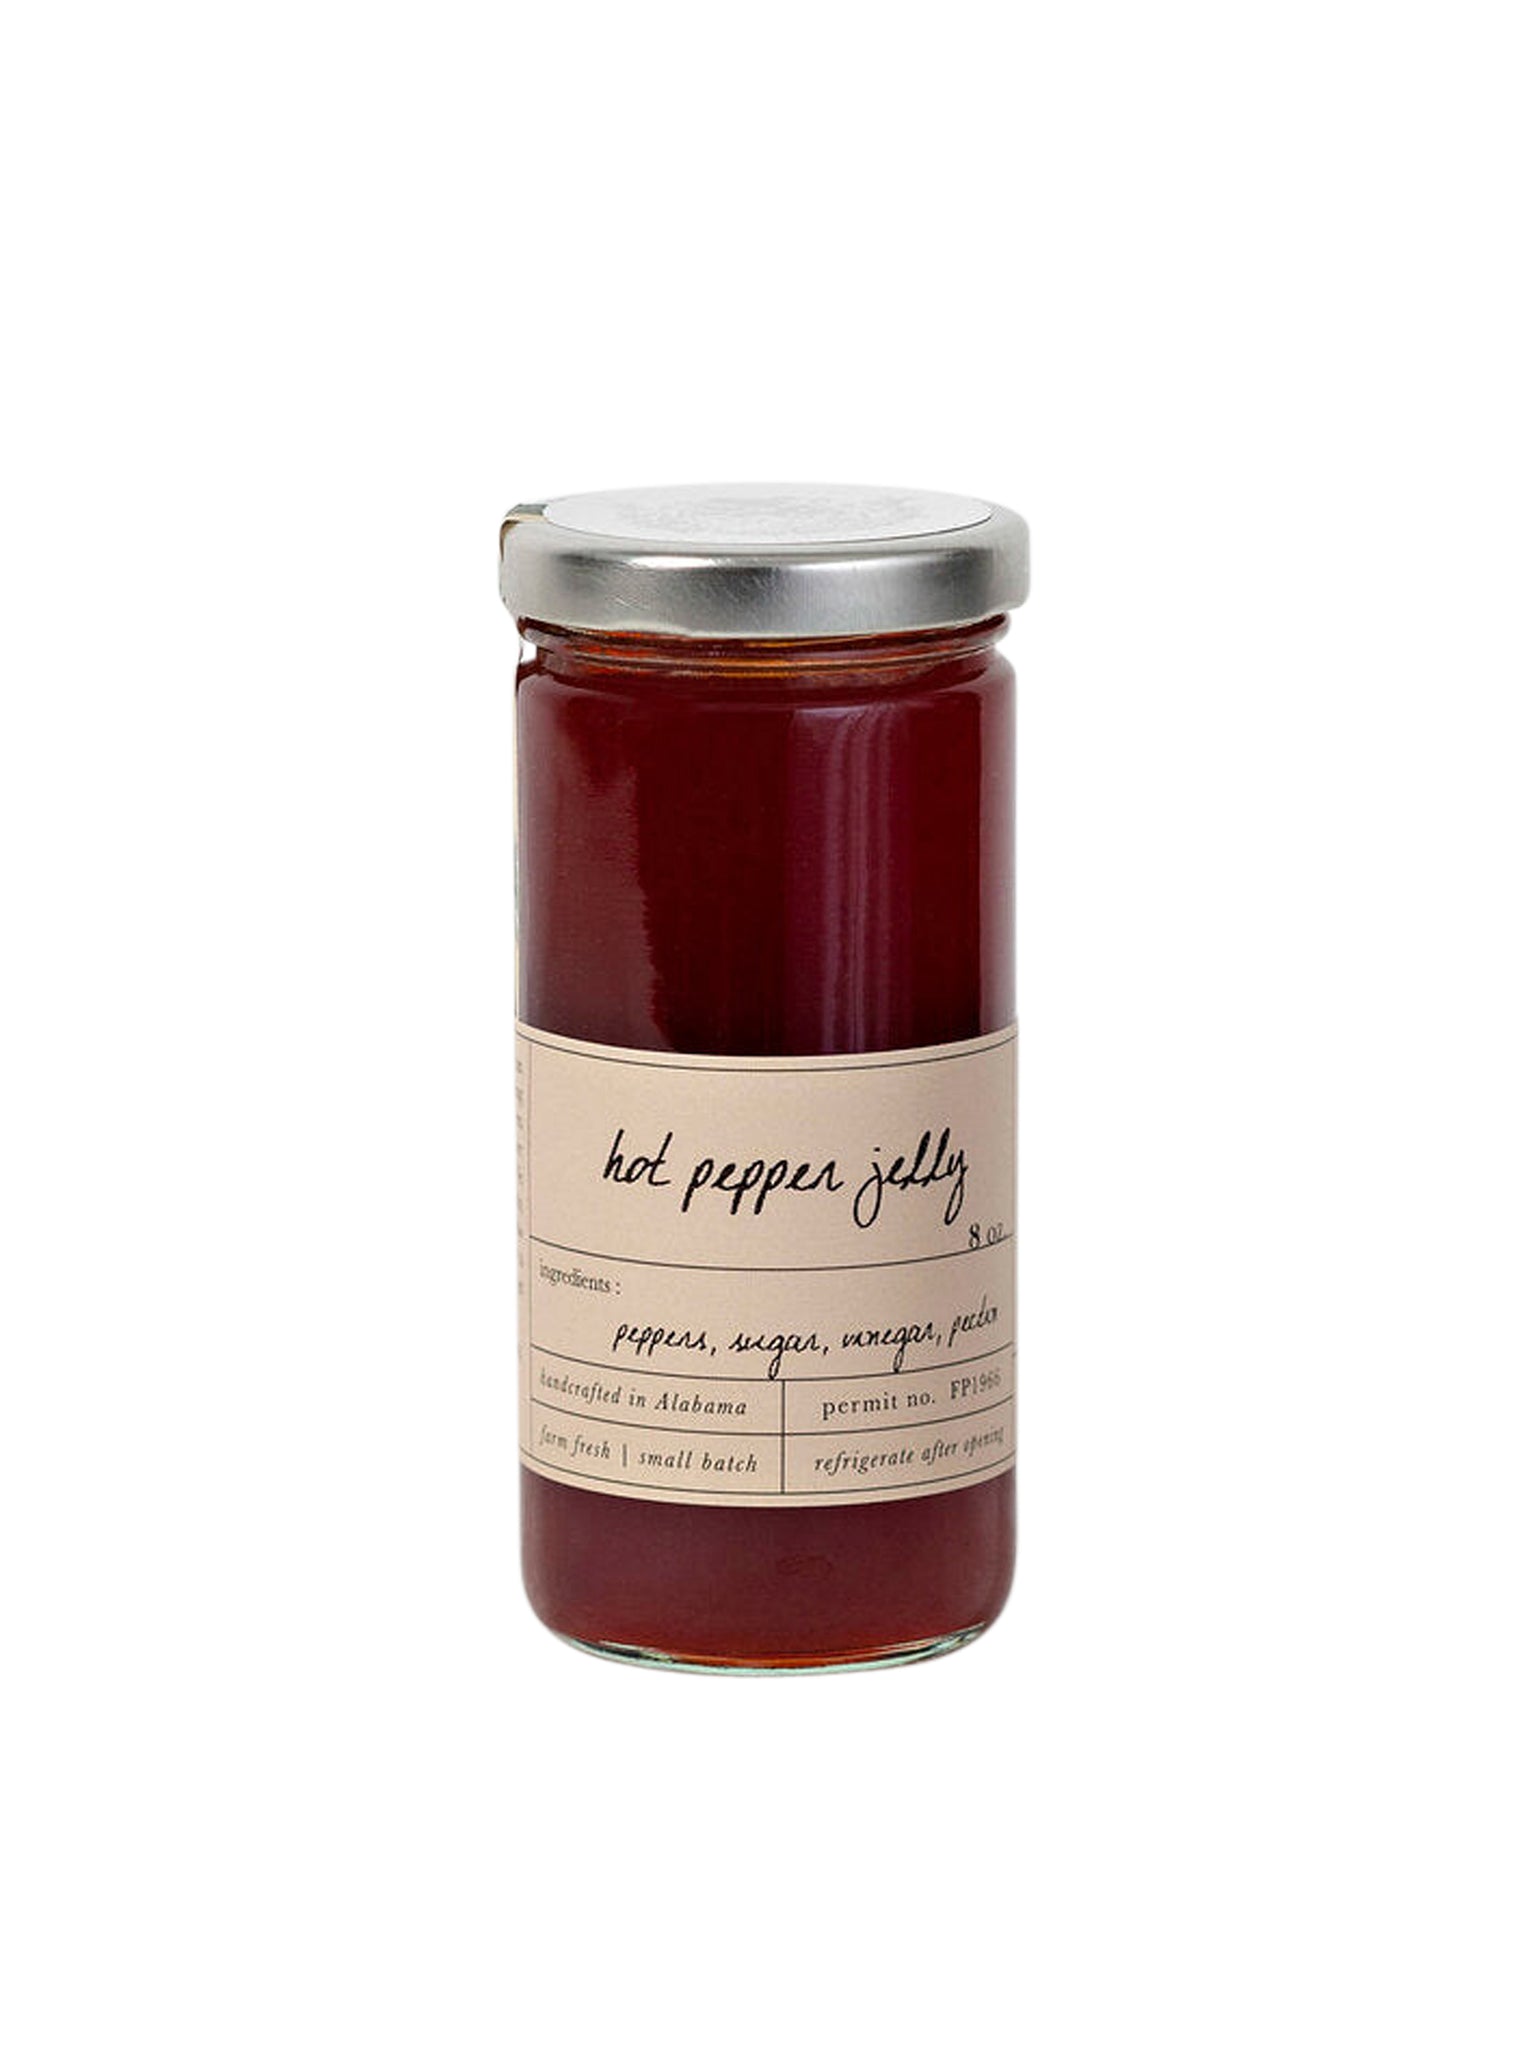 Stone Hollow Farmstead Hot Pepper Jelly Weston Table